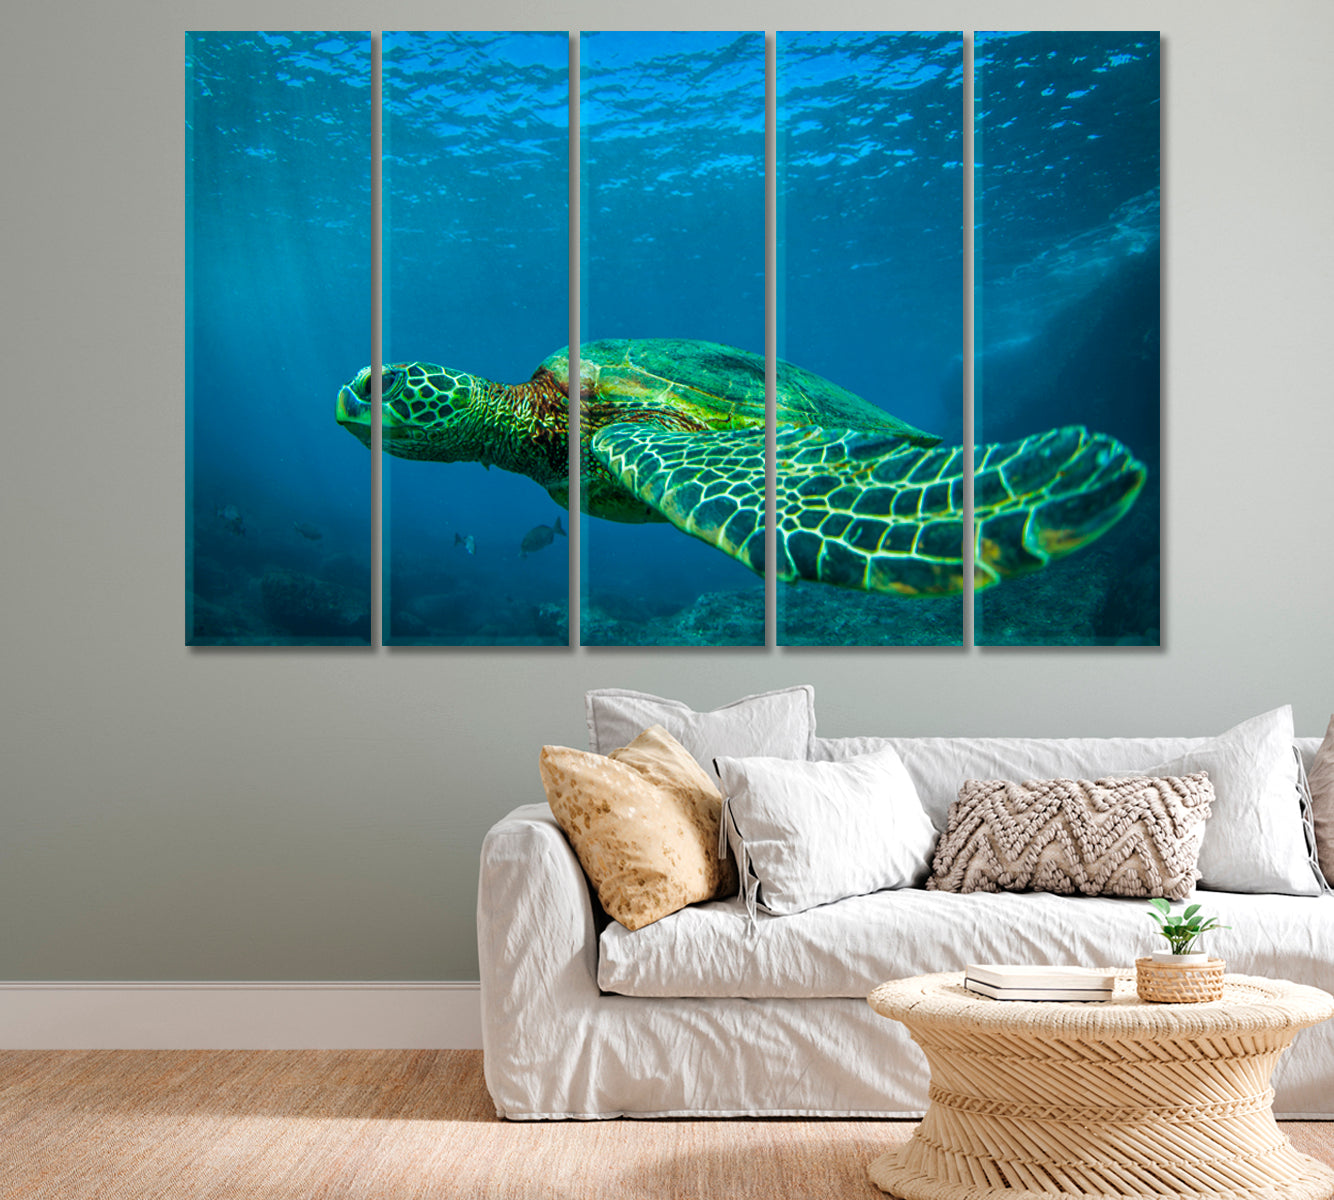 Green Sea Turtle Swimming Among Coral Reefs Canvas Print-Canvas Print-CetArt-1 Panel-24x16 inches-CetArt